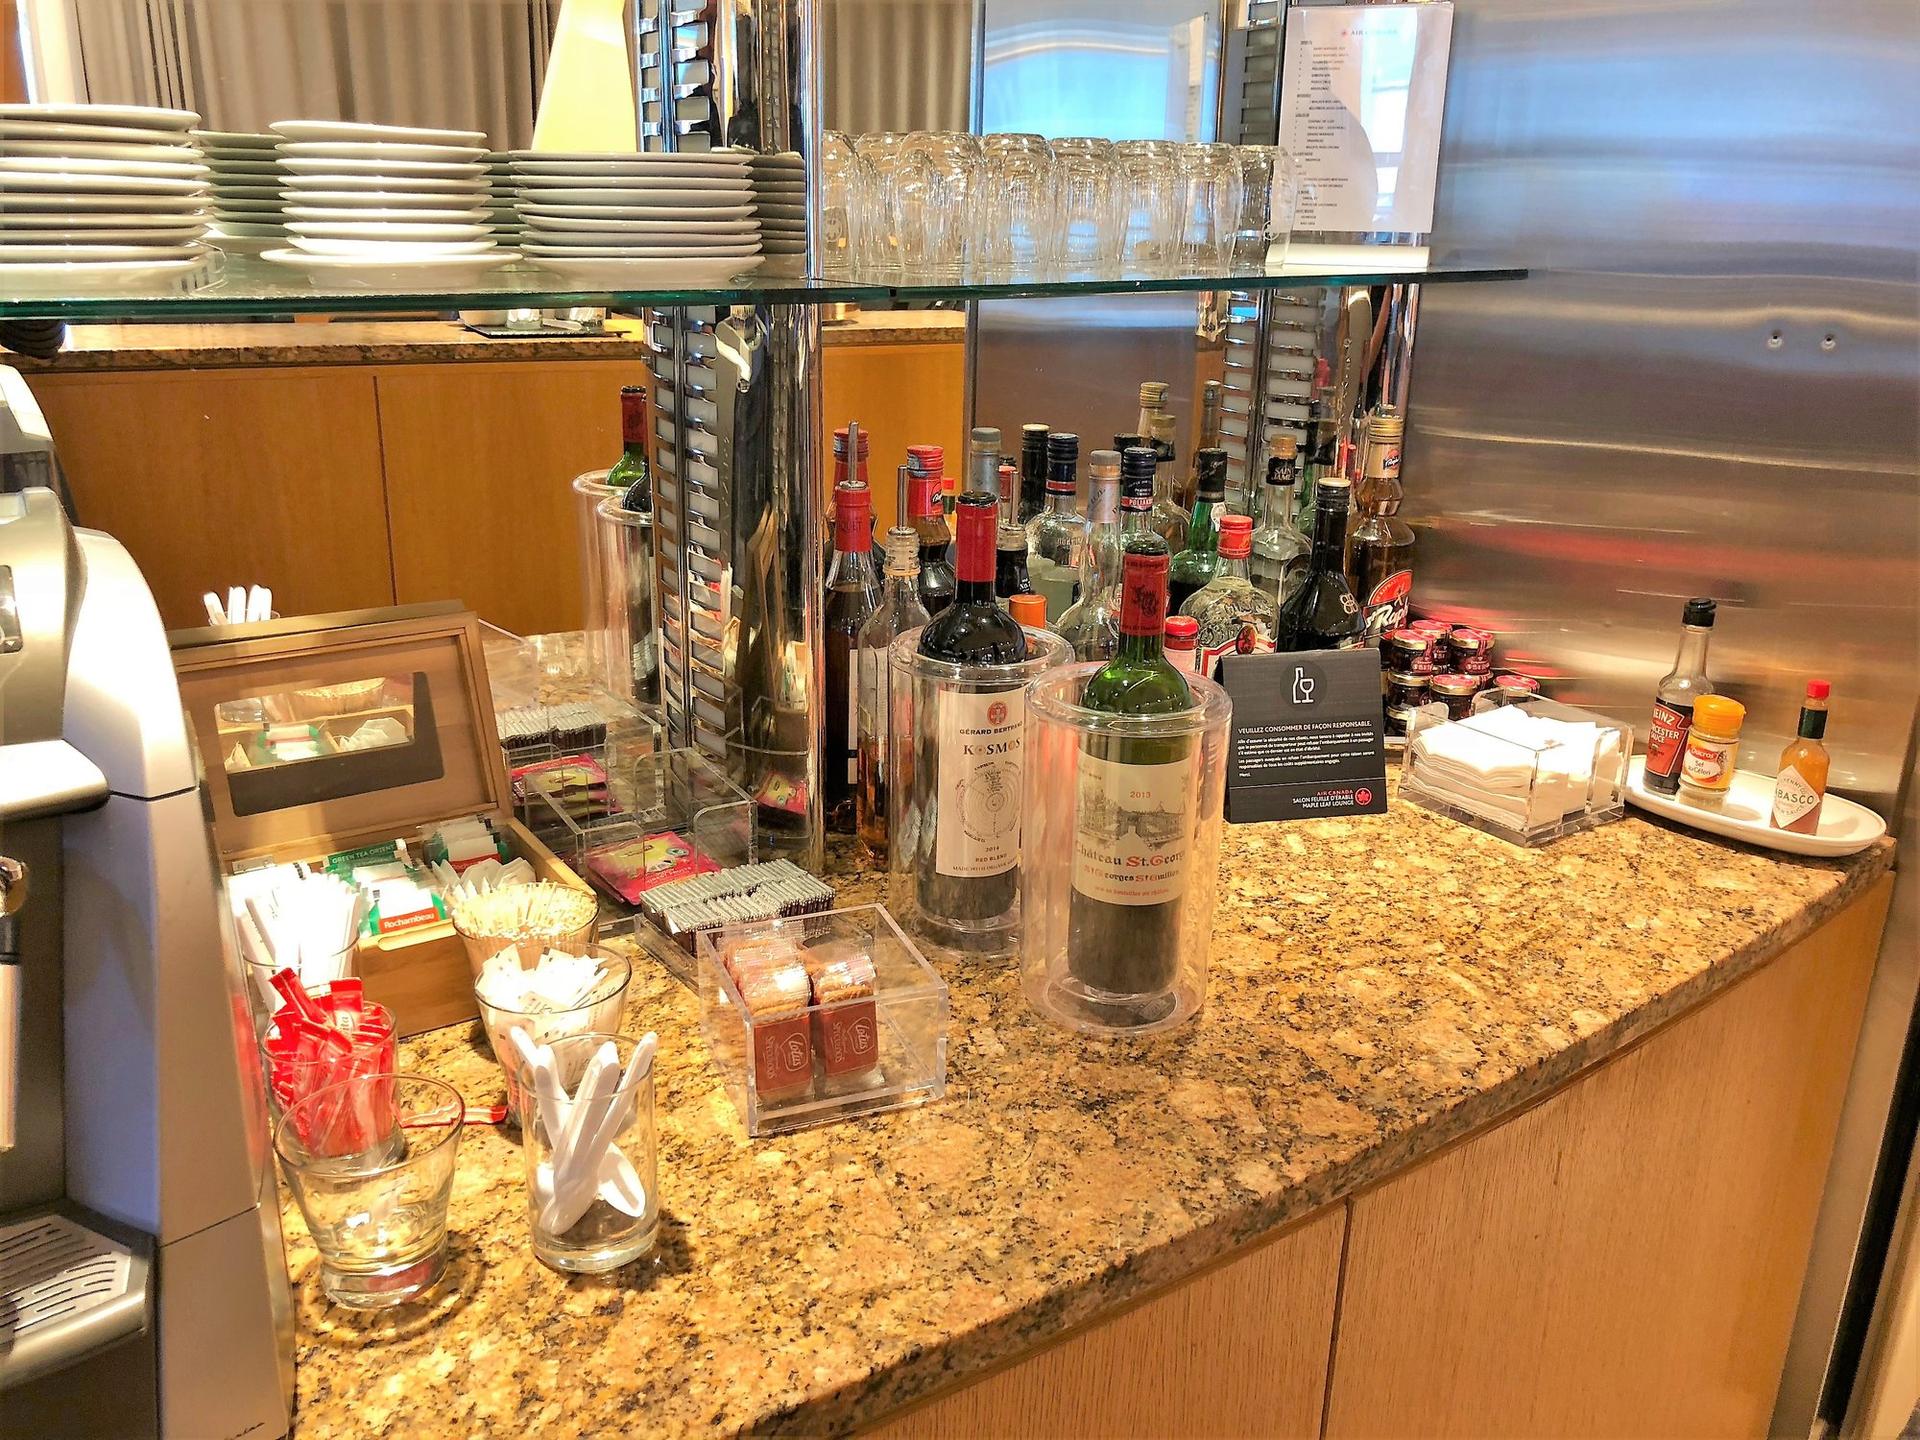 Air Canada Maple Leaf Lounge image 61 of 64